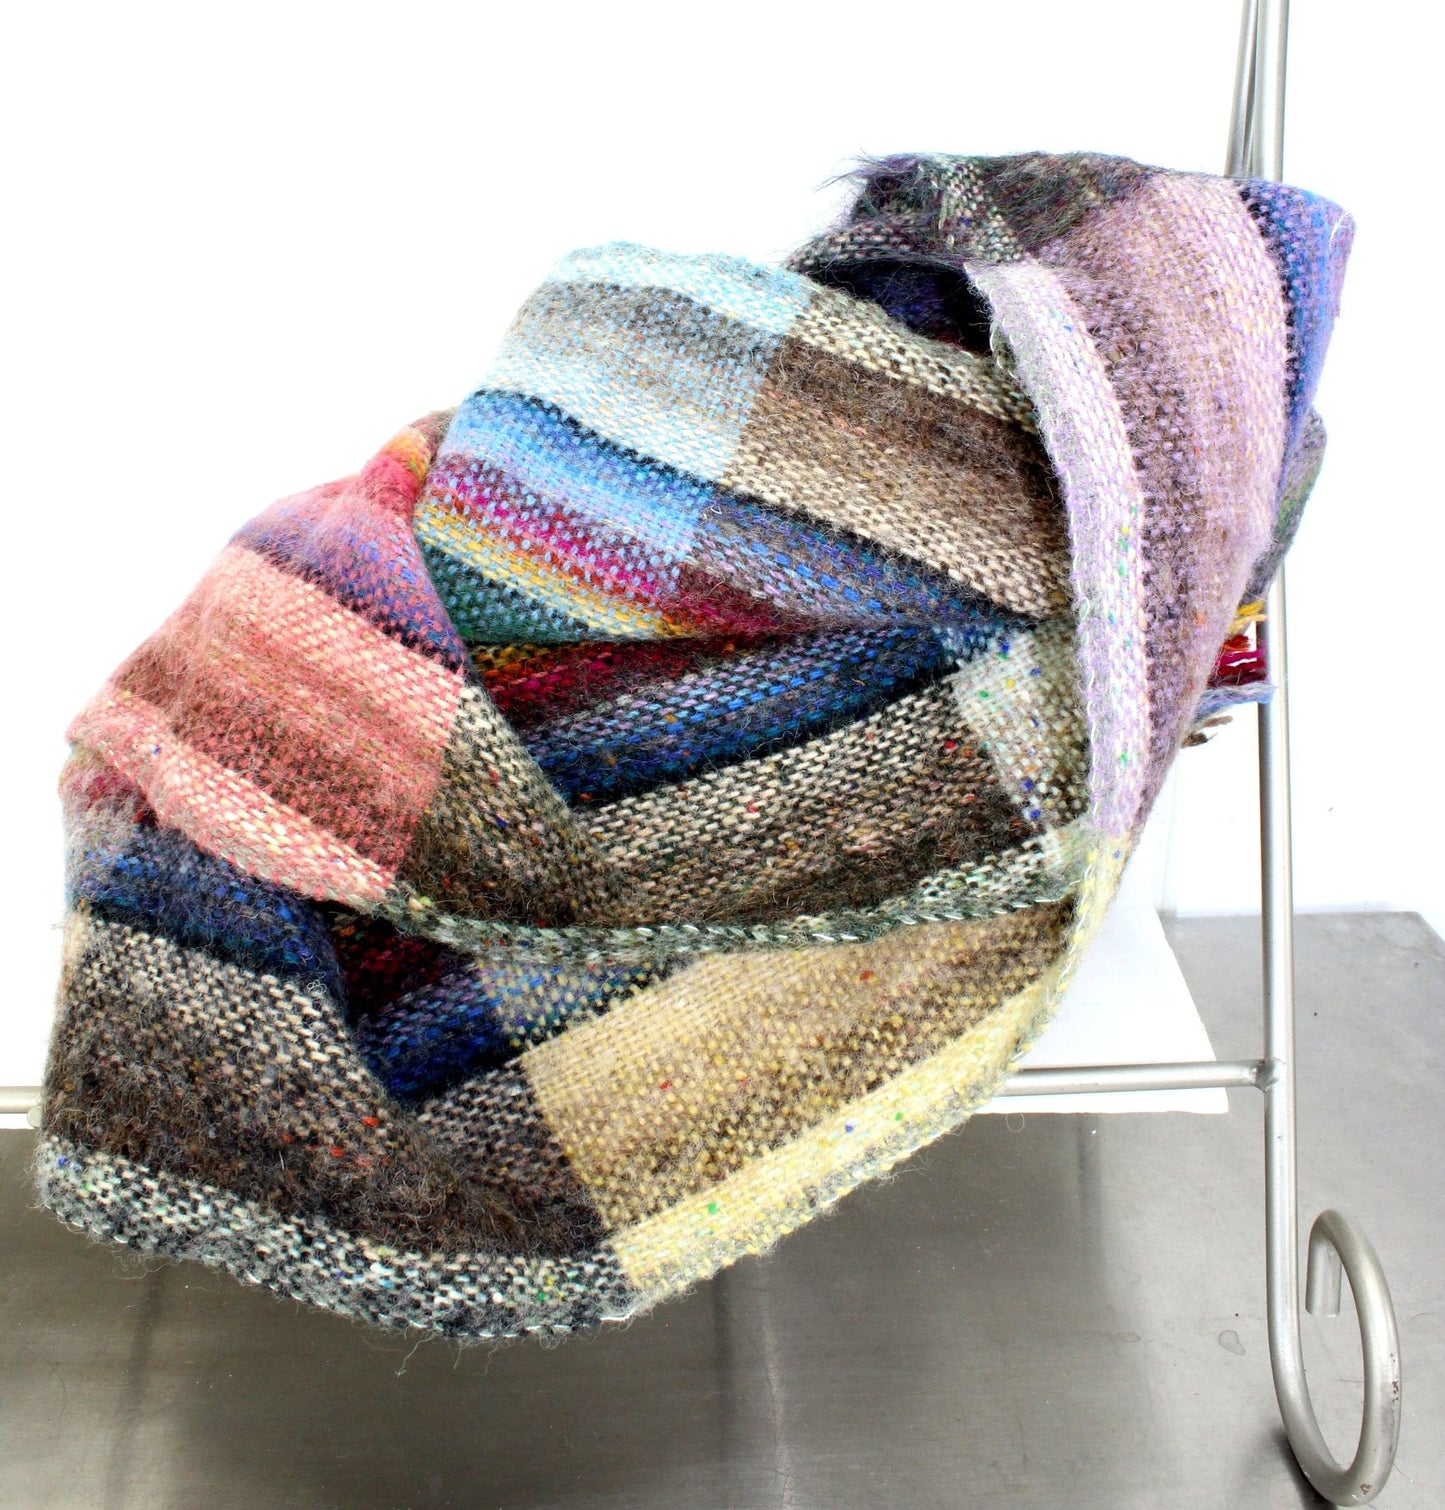 Donegal Handwoven Tweed John Molloy Throw Blanket - Lambswool Fringed Awesome serene restful throw